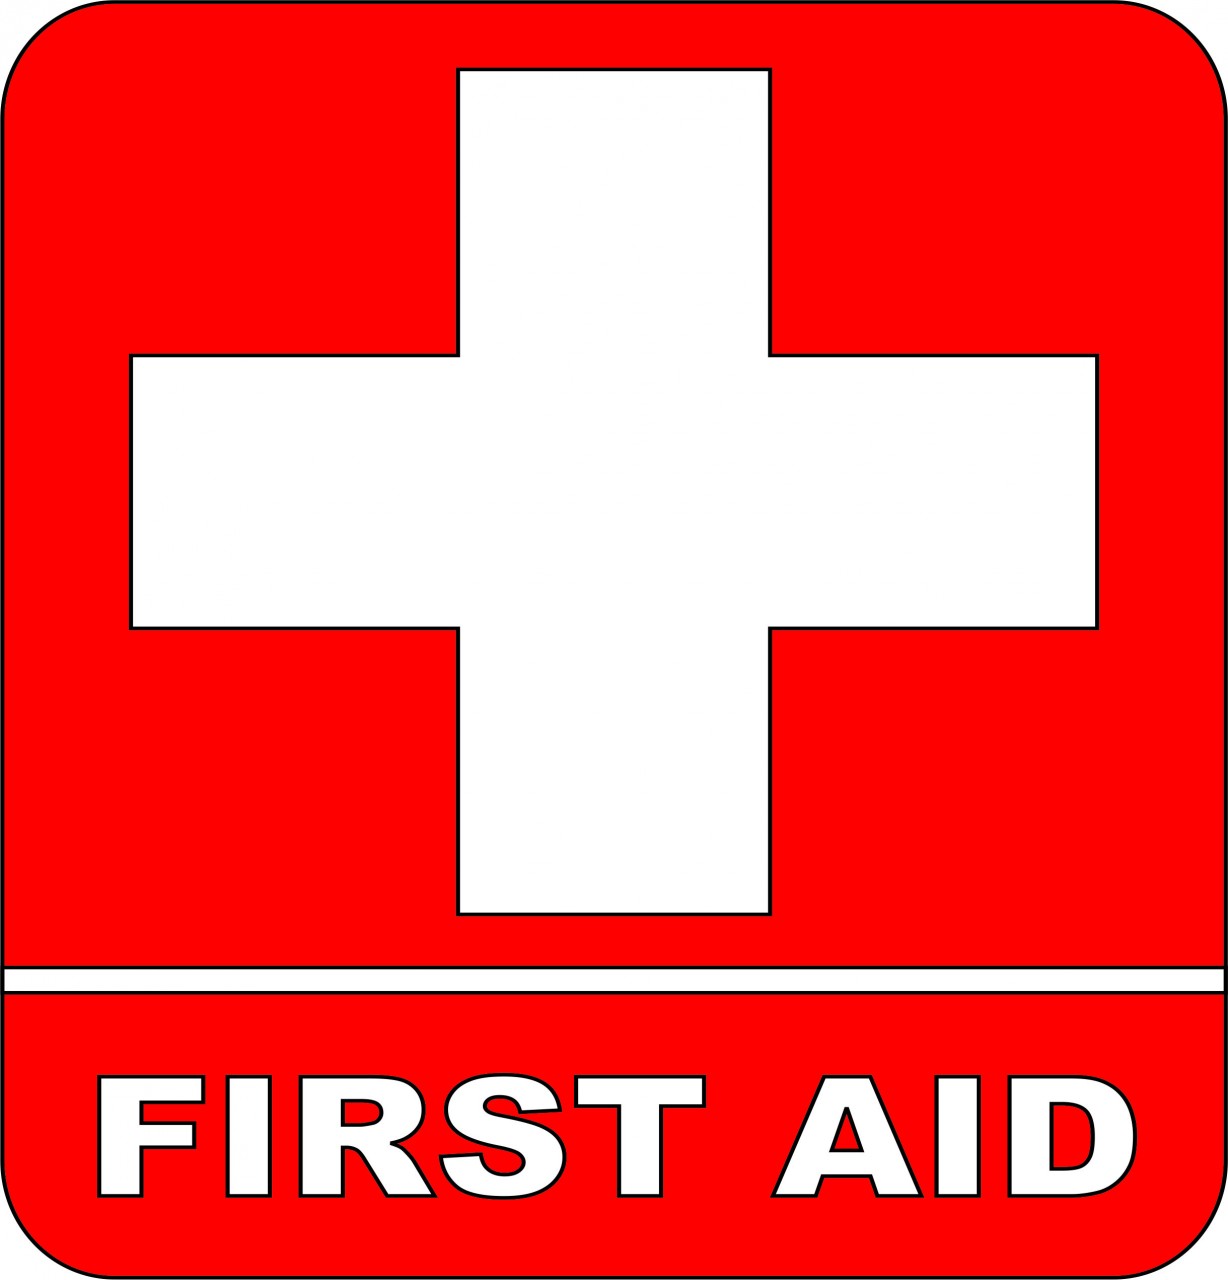 40 First Aid Logo Free Cliparts That You Can Download To You Computer